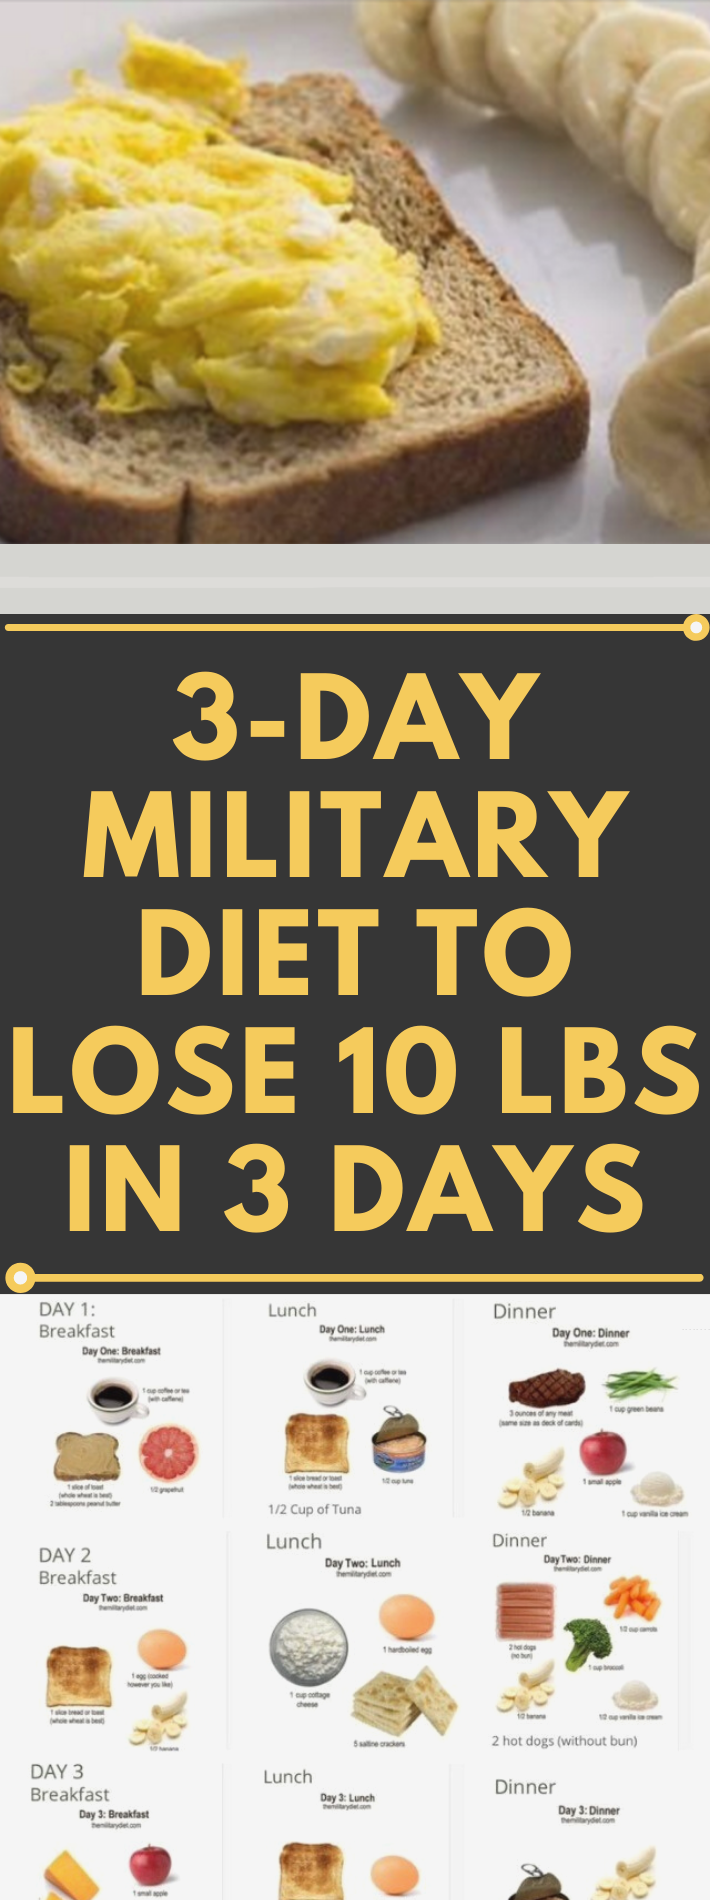 3 DAY MILITARY DIET TO LOSE 10 LBS IN 3 3 Day Military Diet Plan 10 